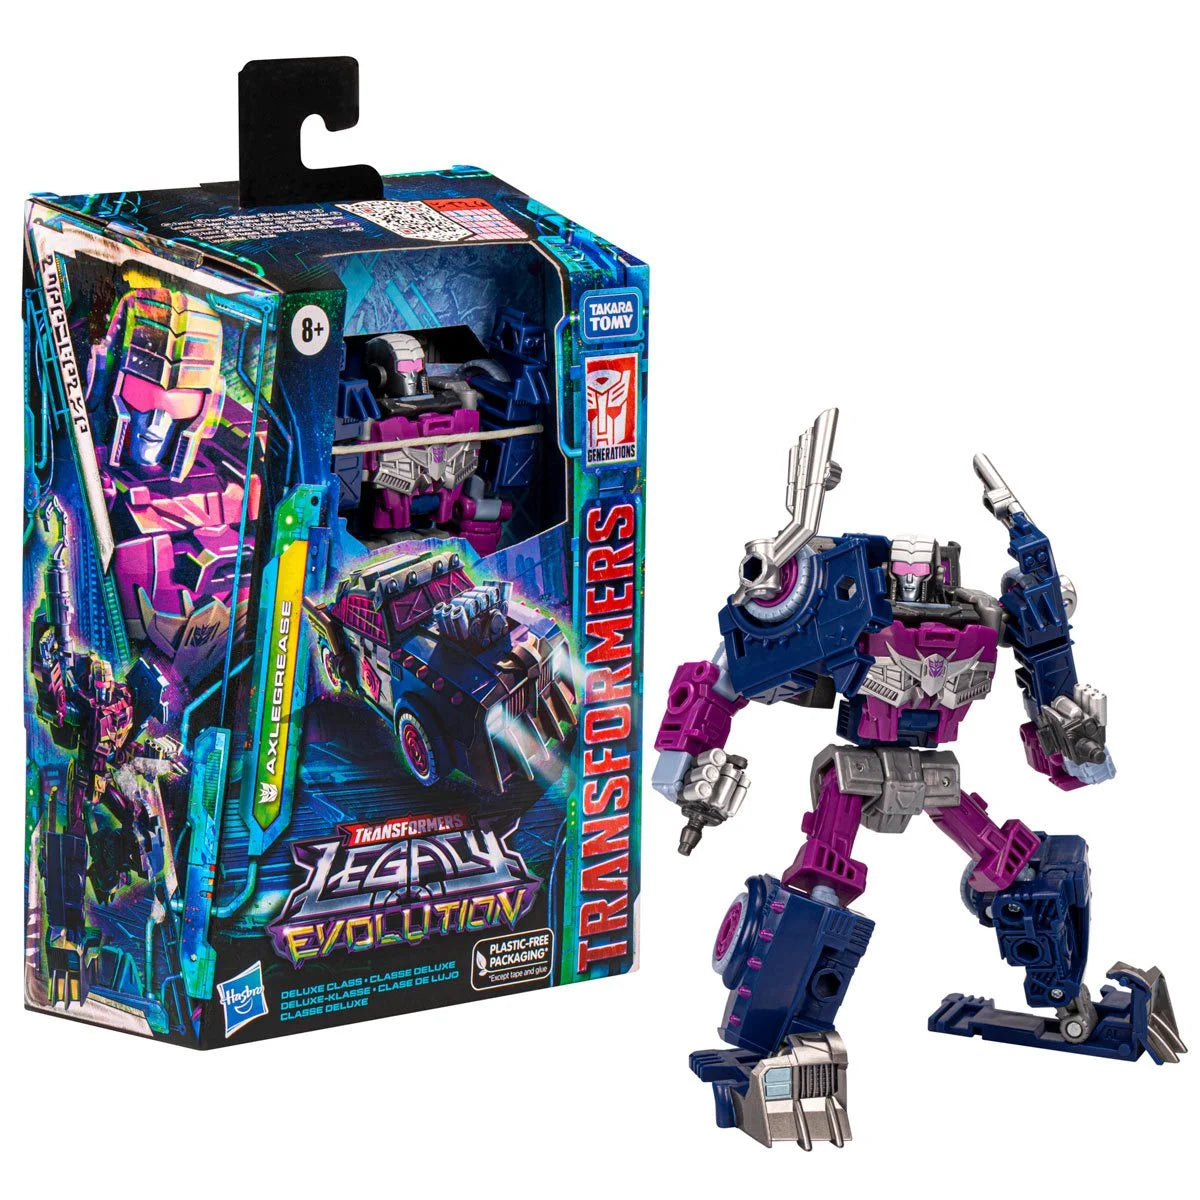 Transformers Generations Legacy Evolution Deluxe Axlegrease Action Figure Toy - Heretoserveyou